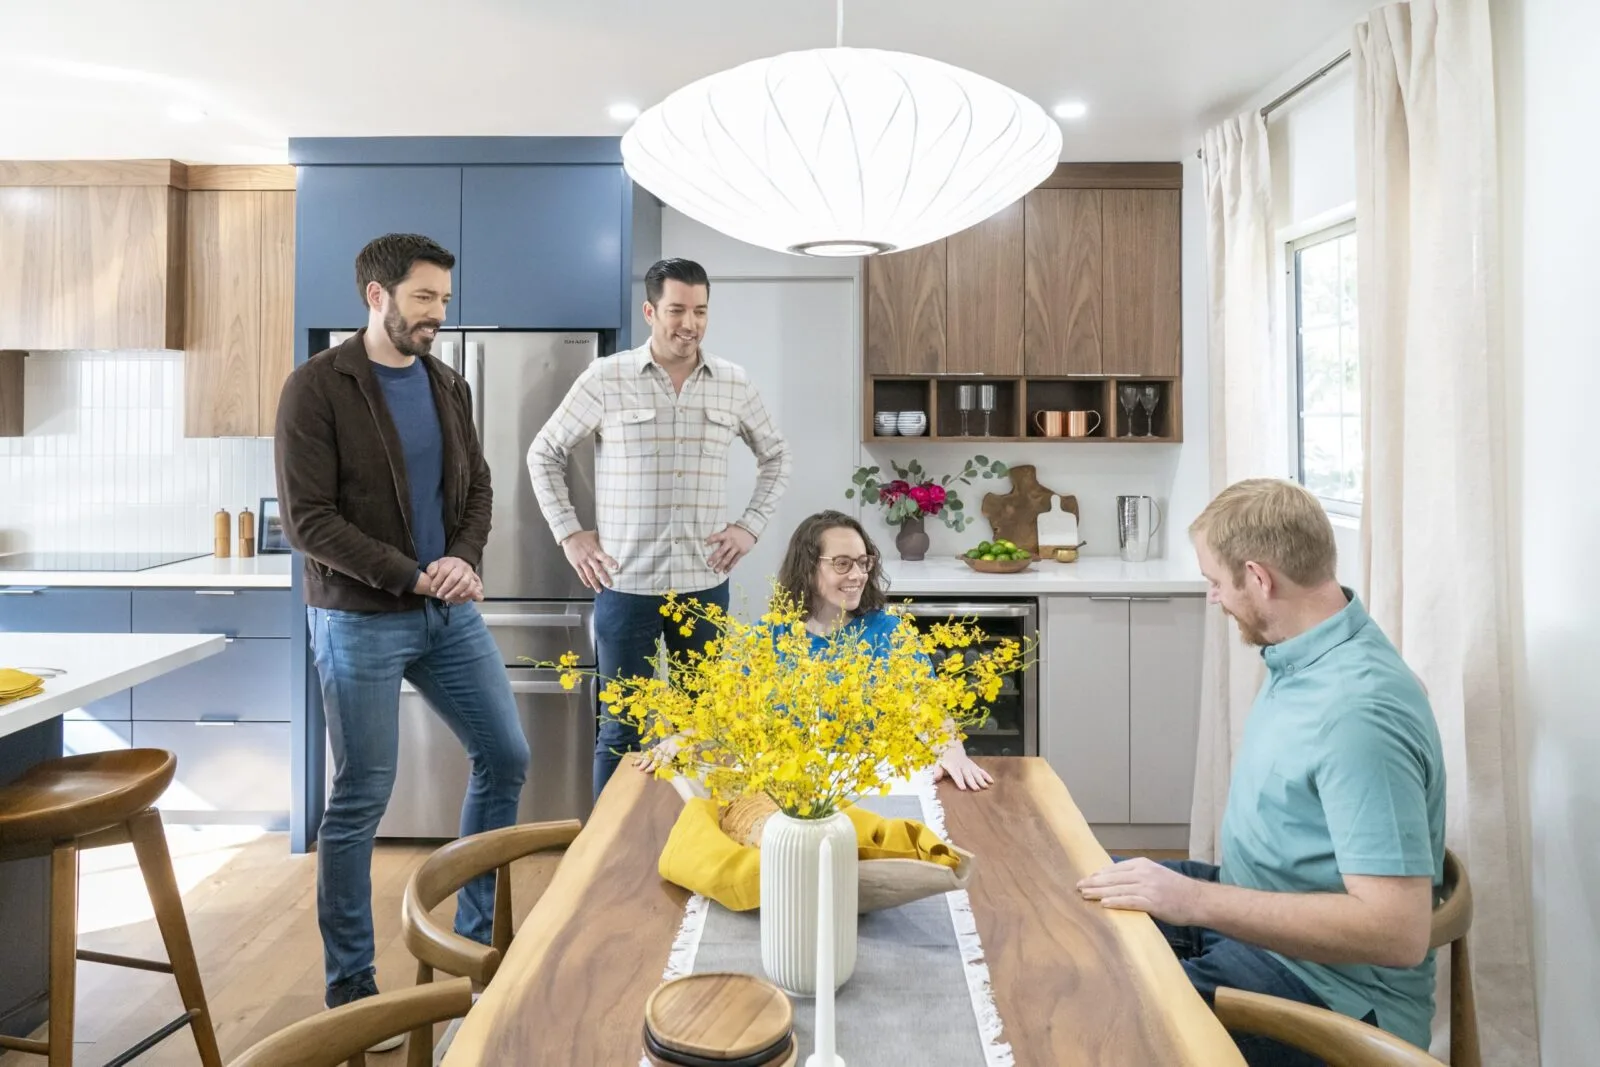 Property Brothers Forever Home: Helen & Jared